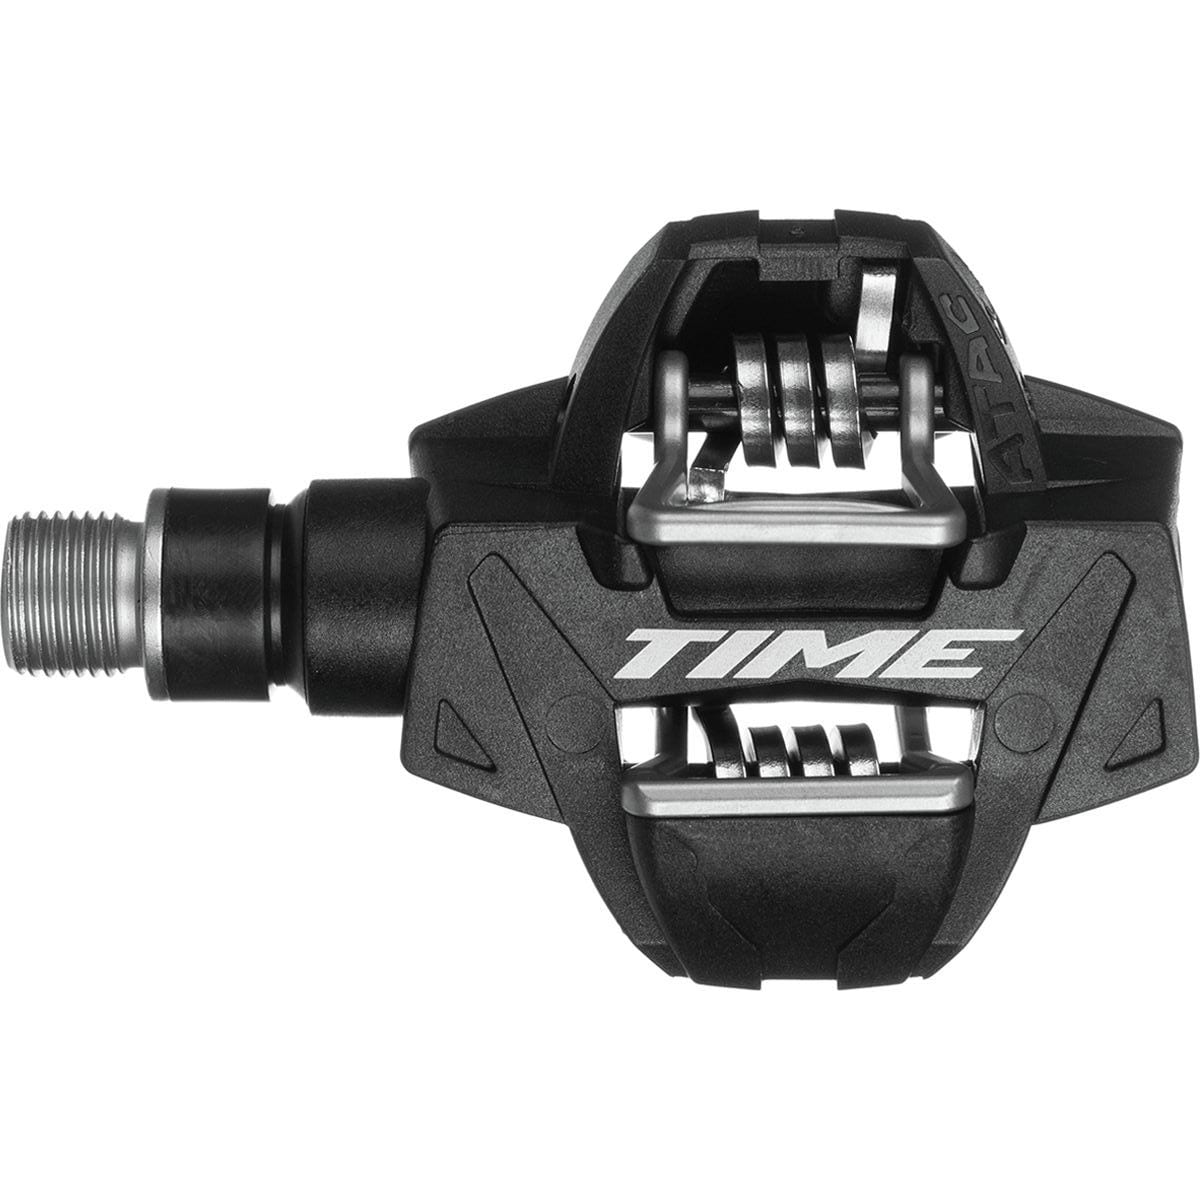 TIME XC 4 Pedals -